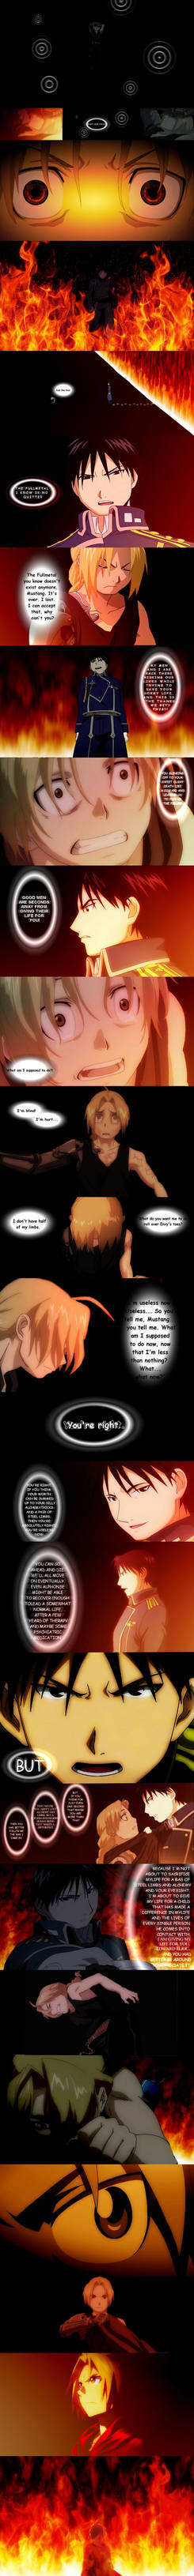 The Fullmetal I know is no quitter